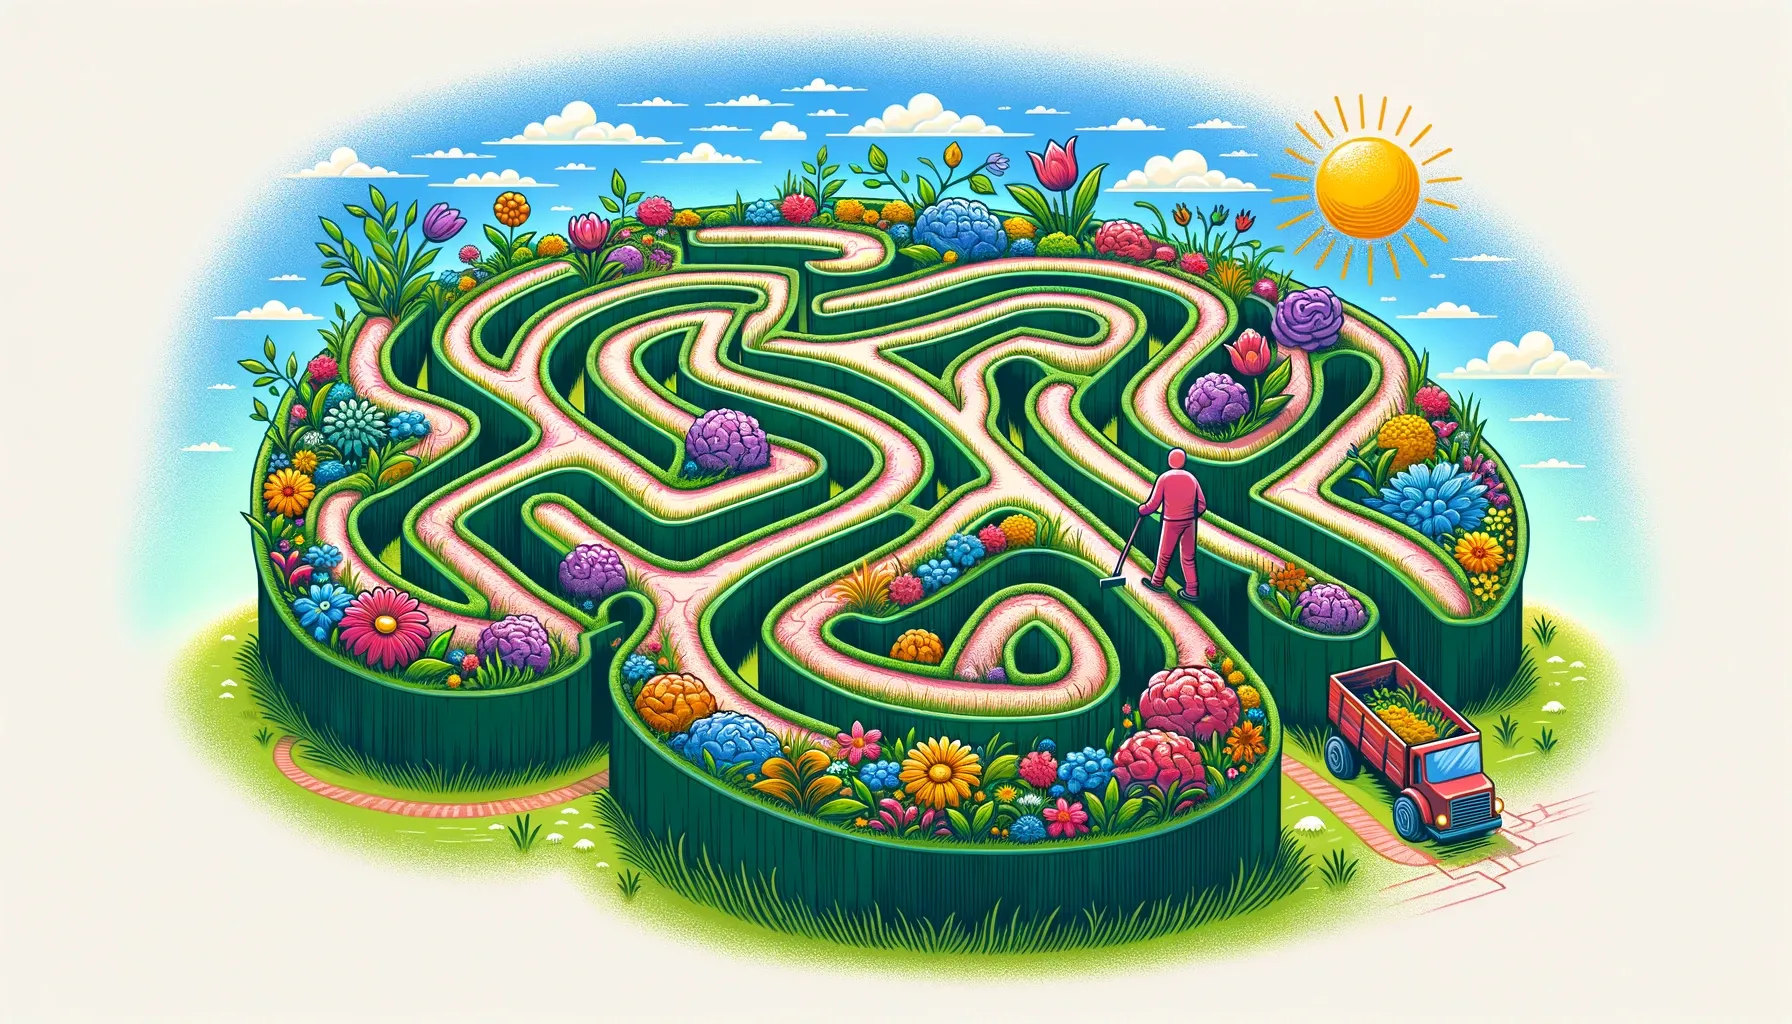 Wide illustration: A panoramic view of a brain-shaped garden maze. As one navigates the pathways (representing the journey of cognitive wellness), they encounter vibrant flowers and occasional weeds. A figure, symbolizing coloring, tends to areas, ensuring the maze remains clear and beautiful.